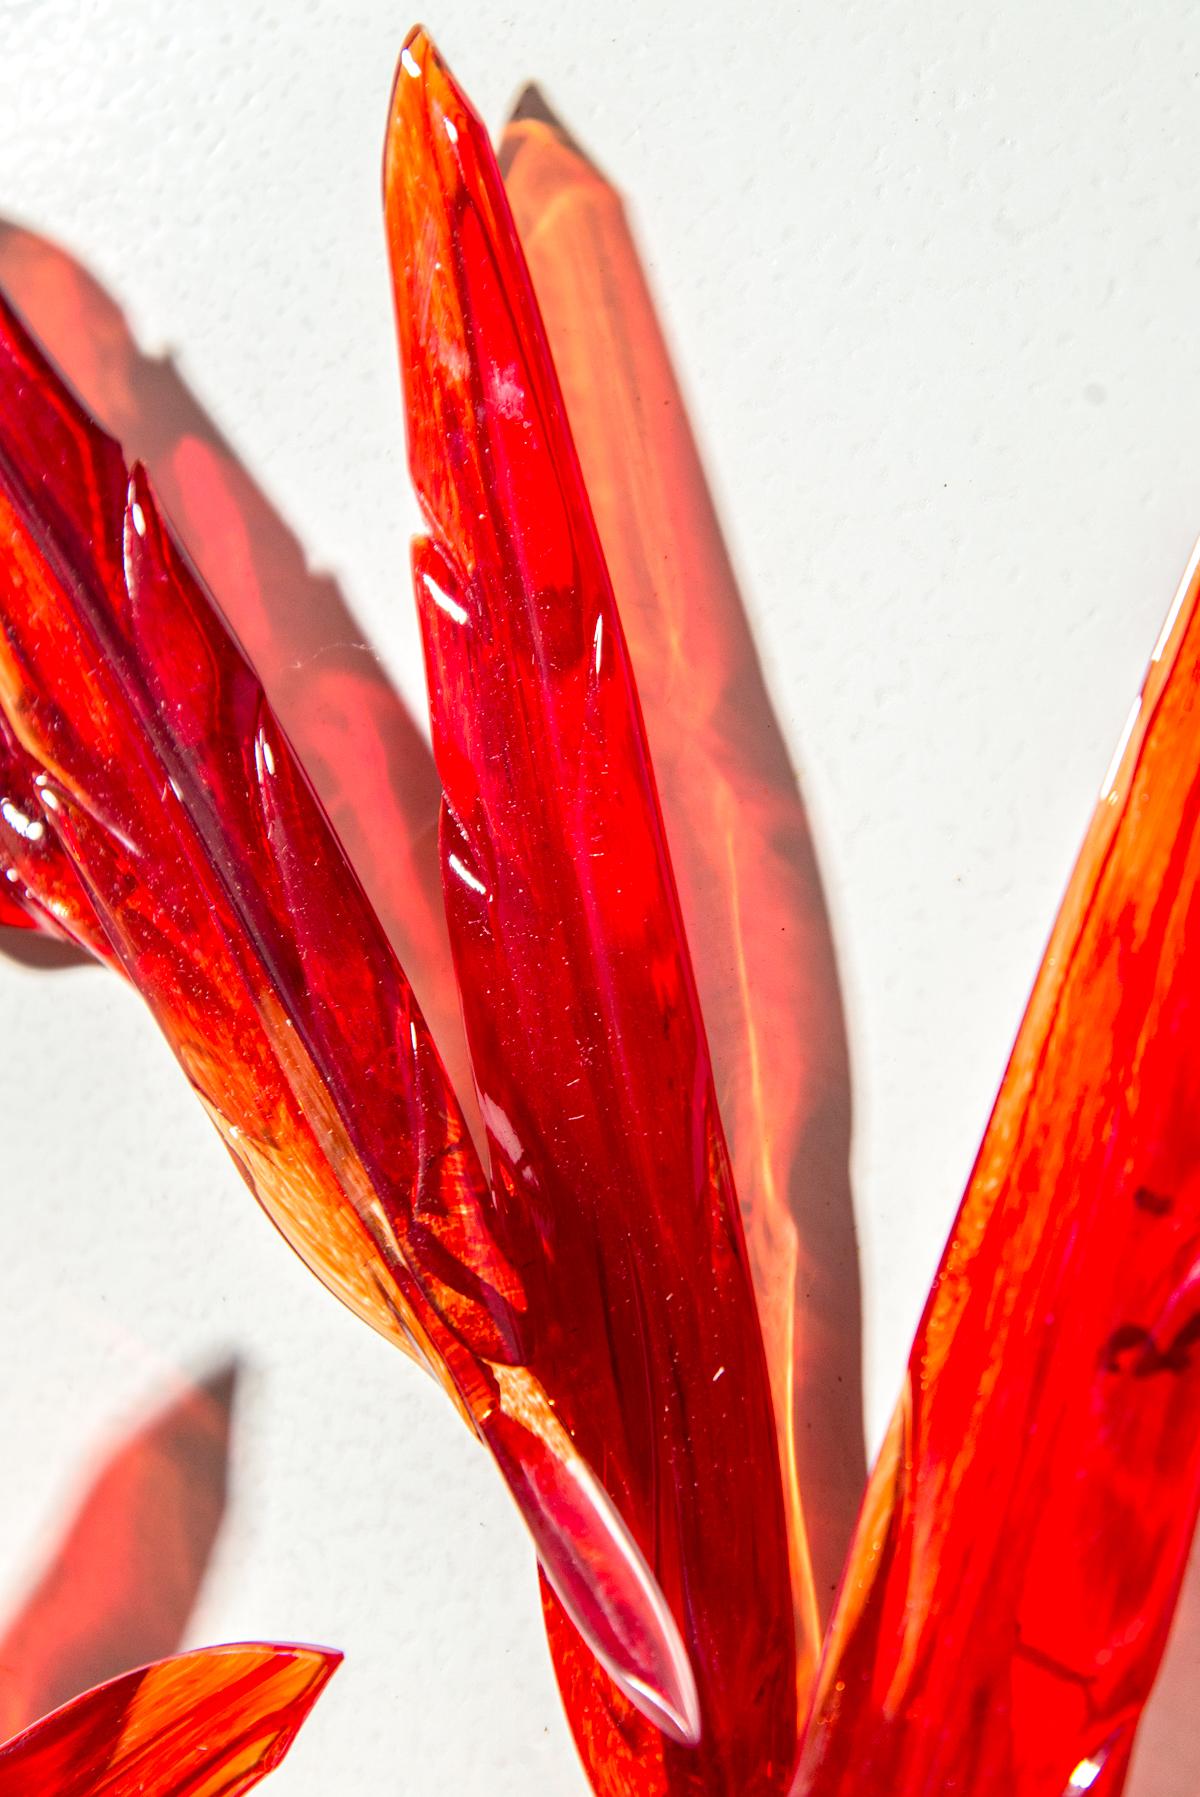 Crimson glass feathers are gathered into a fiery composition in this dramatic wall sculpture by artist John Paul Robinson. The work is enhanced by the pattern of shadows cast by light filtering through the glass. Robinson was thinking about time,